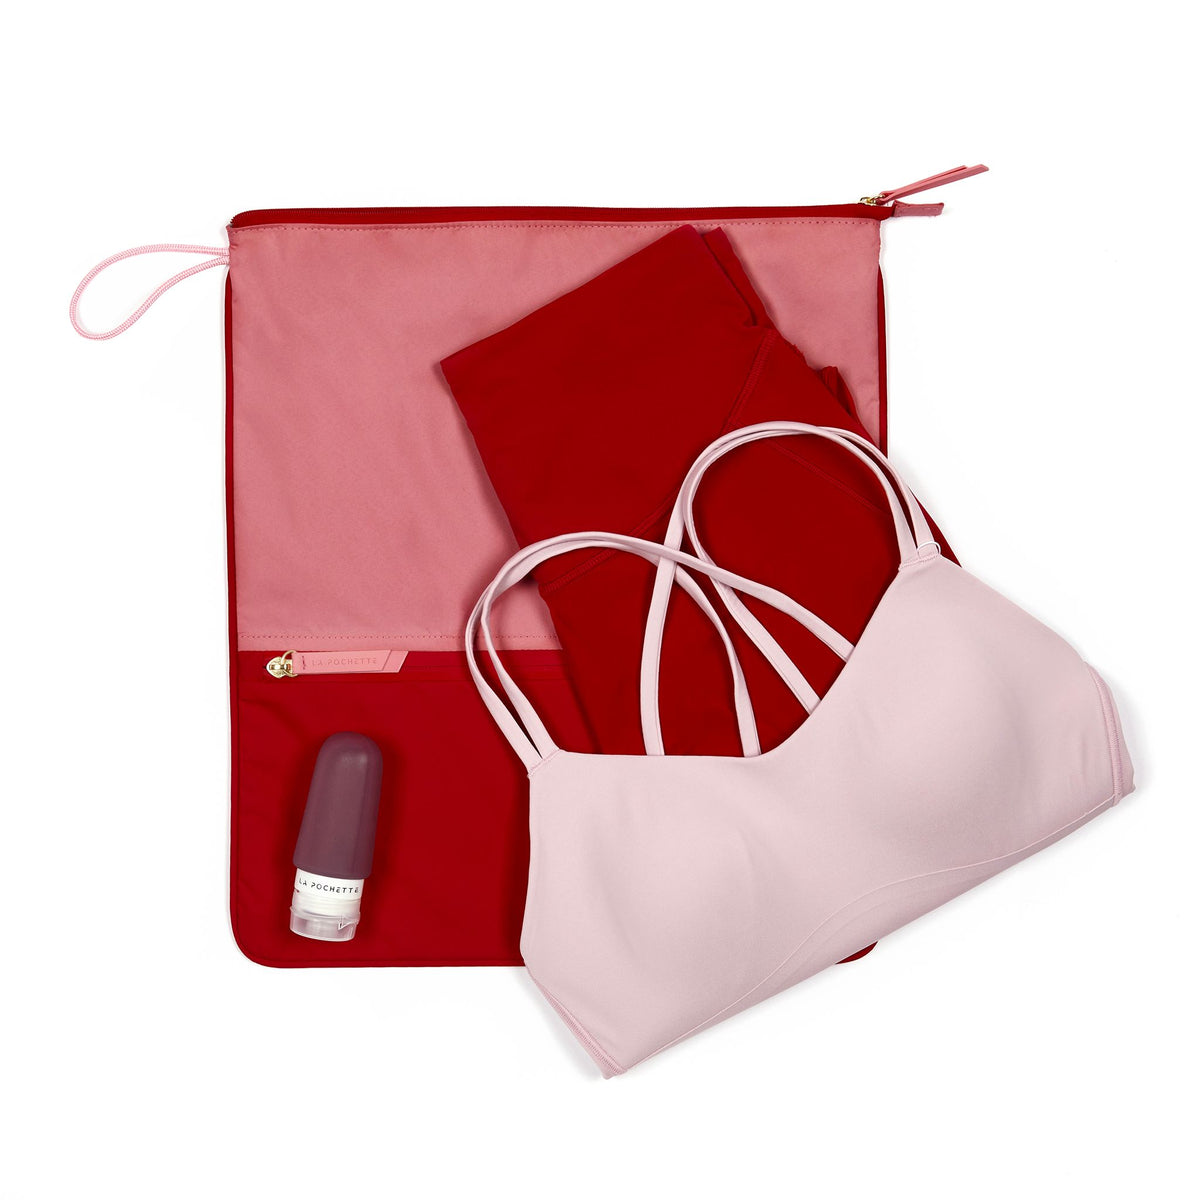 Peony and chilli Sweat Bag shown flat, with folded gym clothes and La Pochette silicone travel bottles